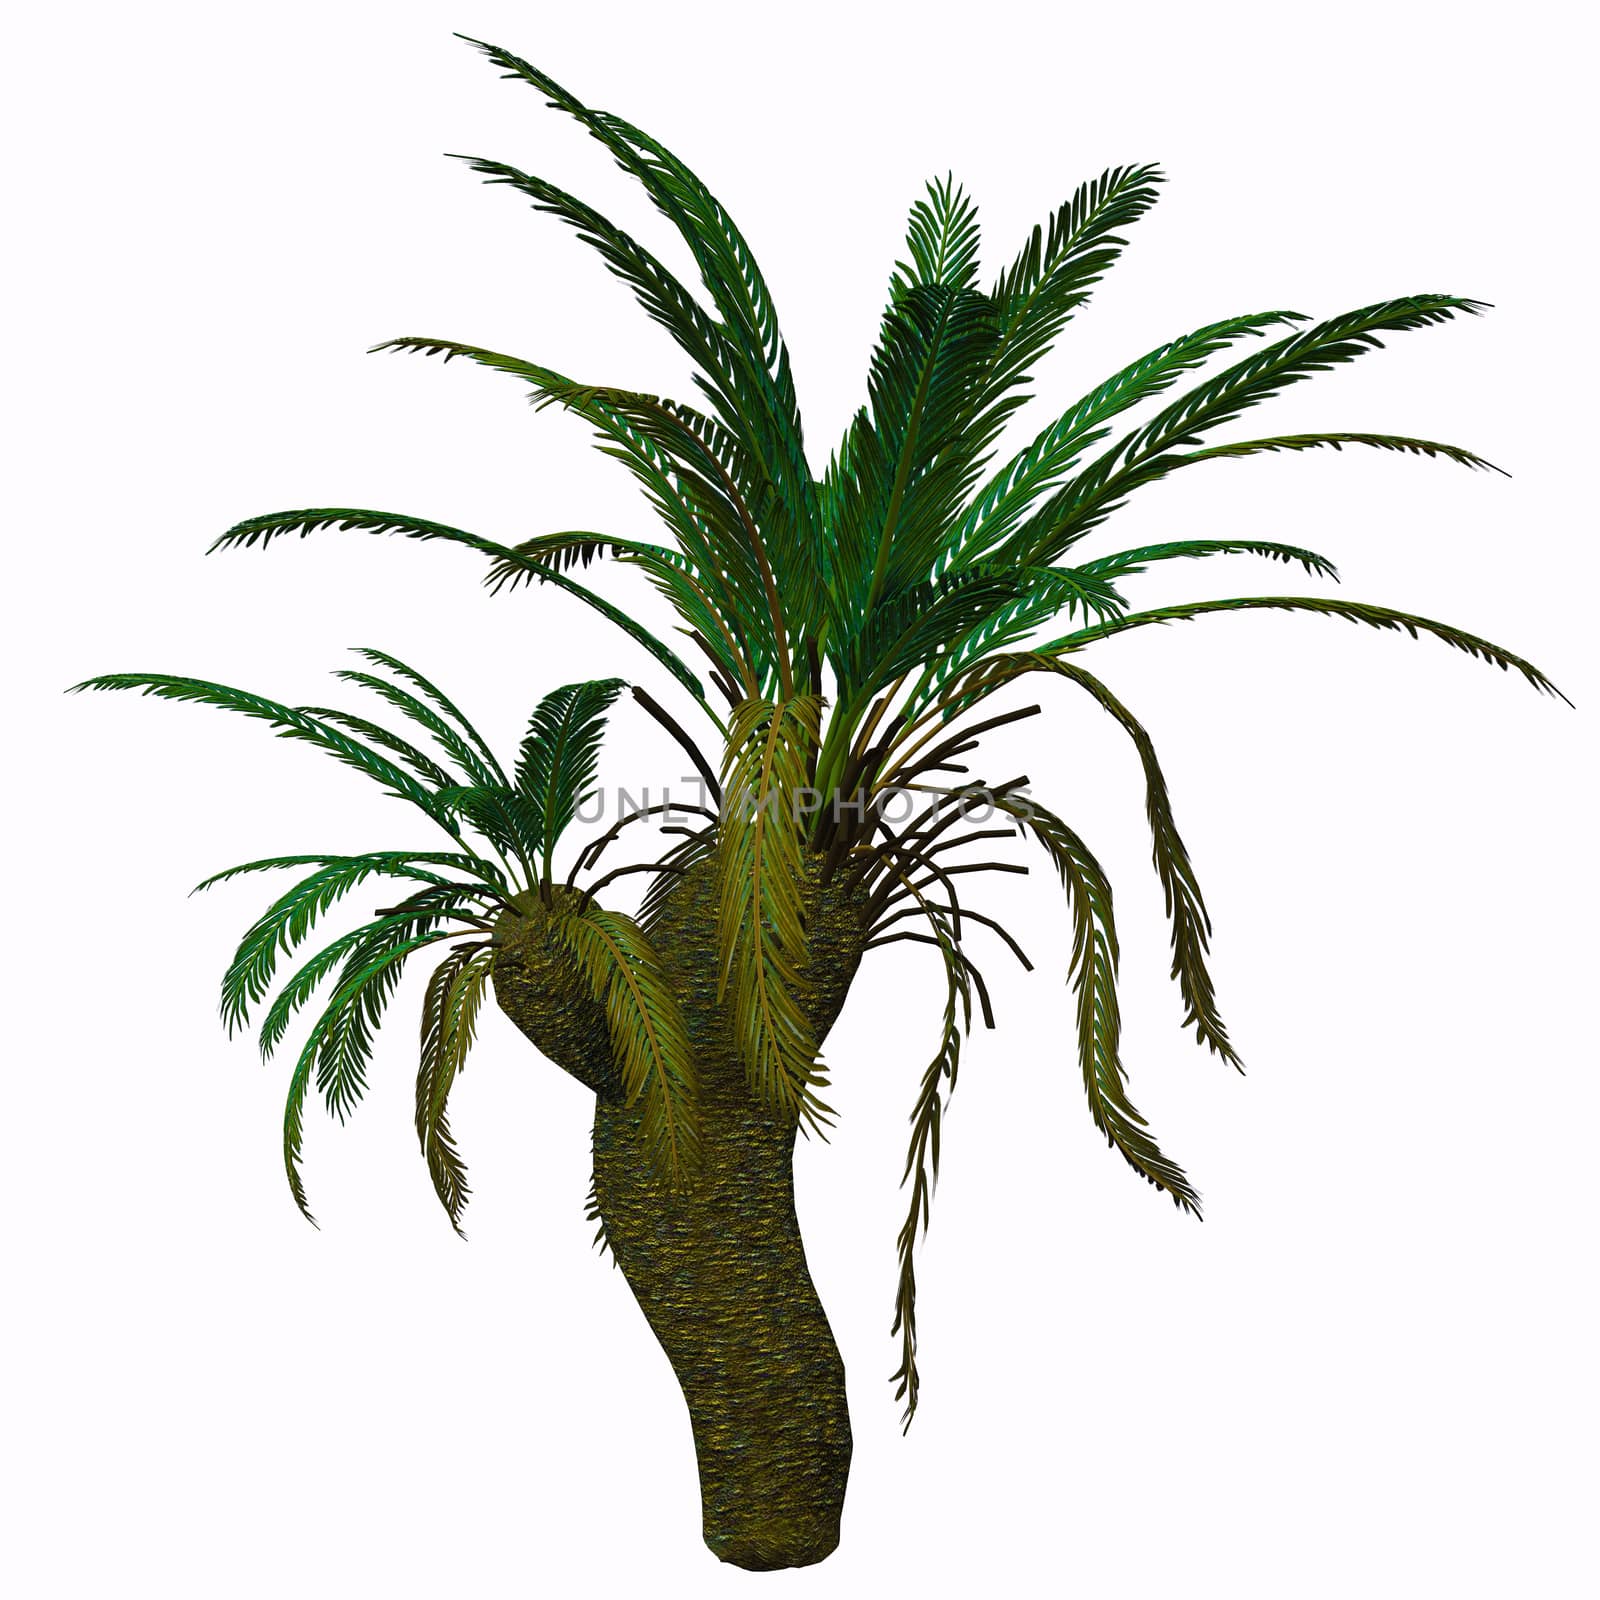 Cycads are seed plants with a long fossil history that were formerly more abundant and more diverse than they are today. The living cycads are found across much of the subtropical and tropical parts of the world